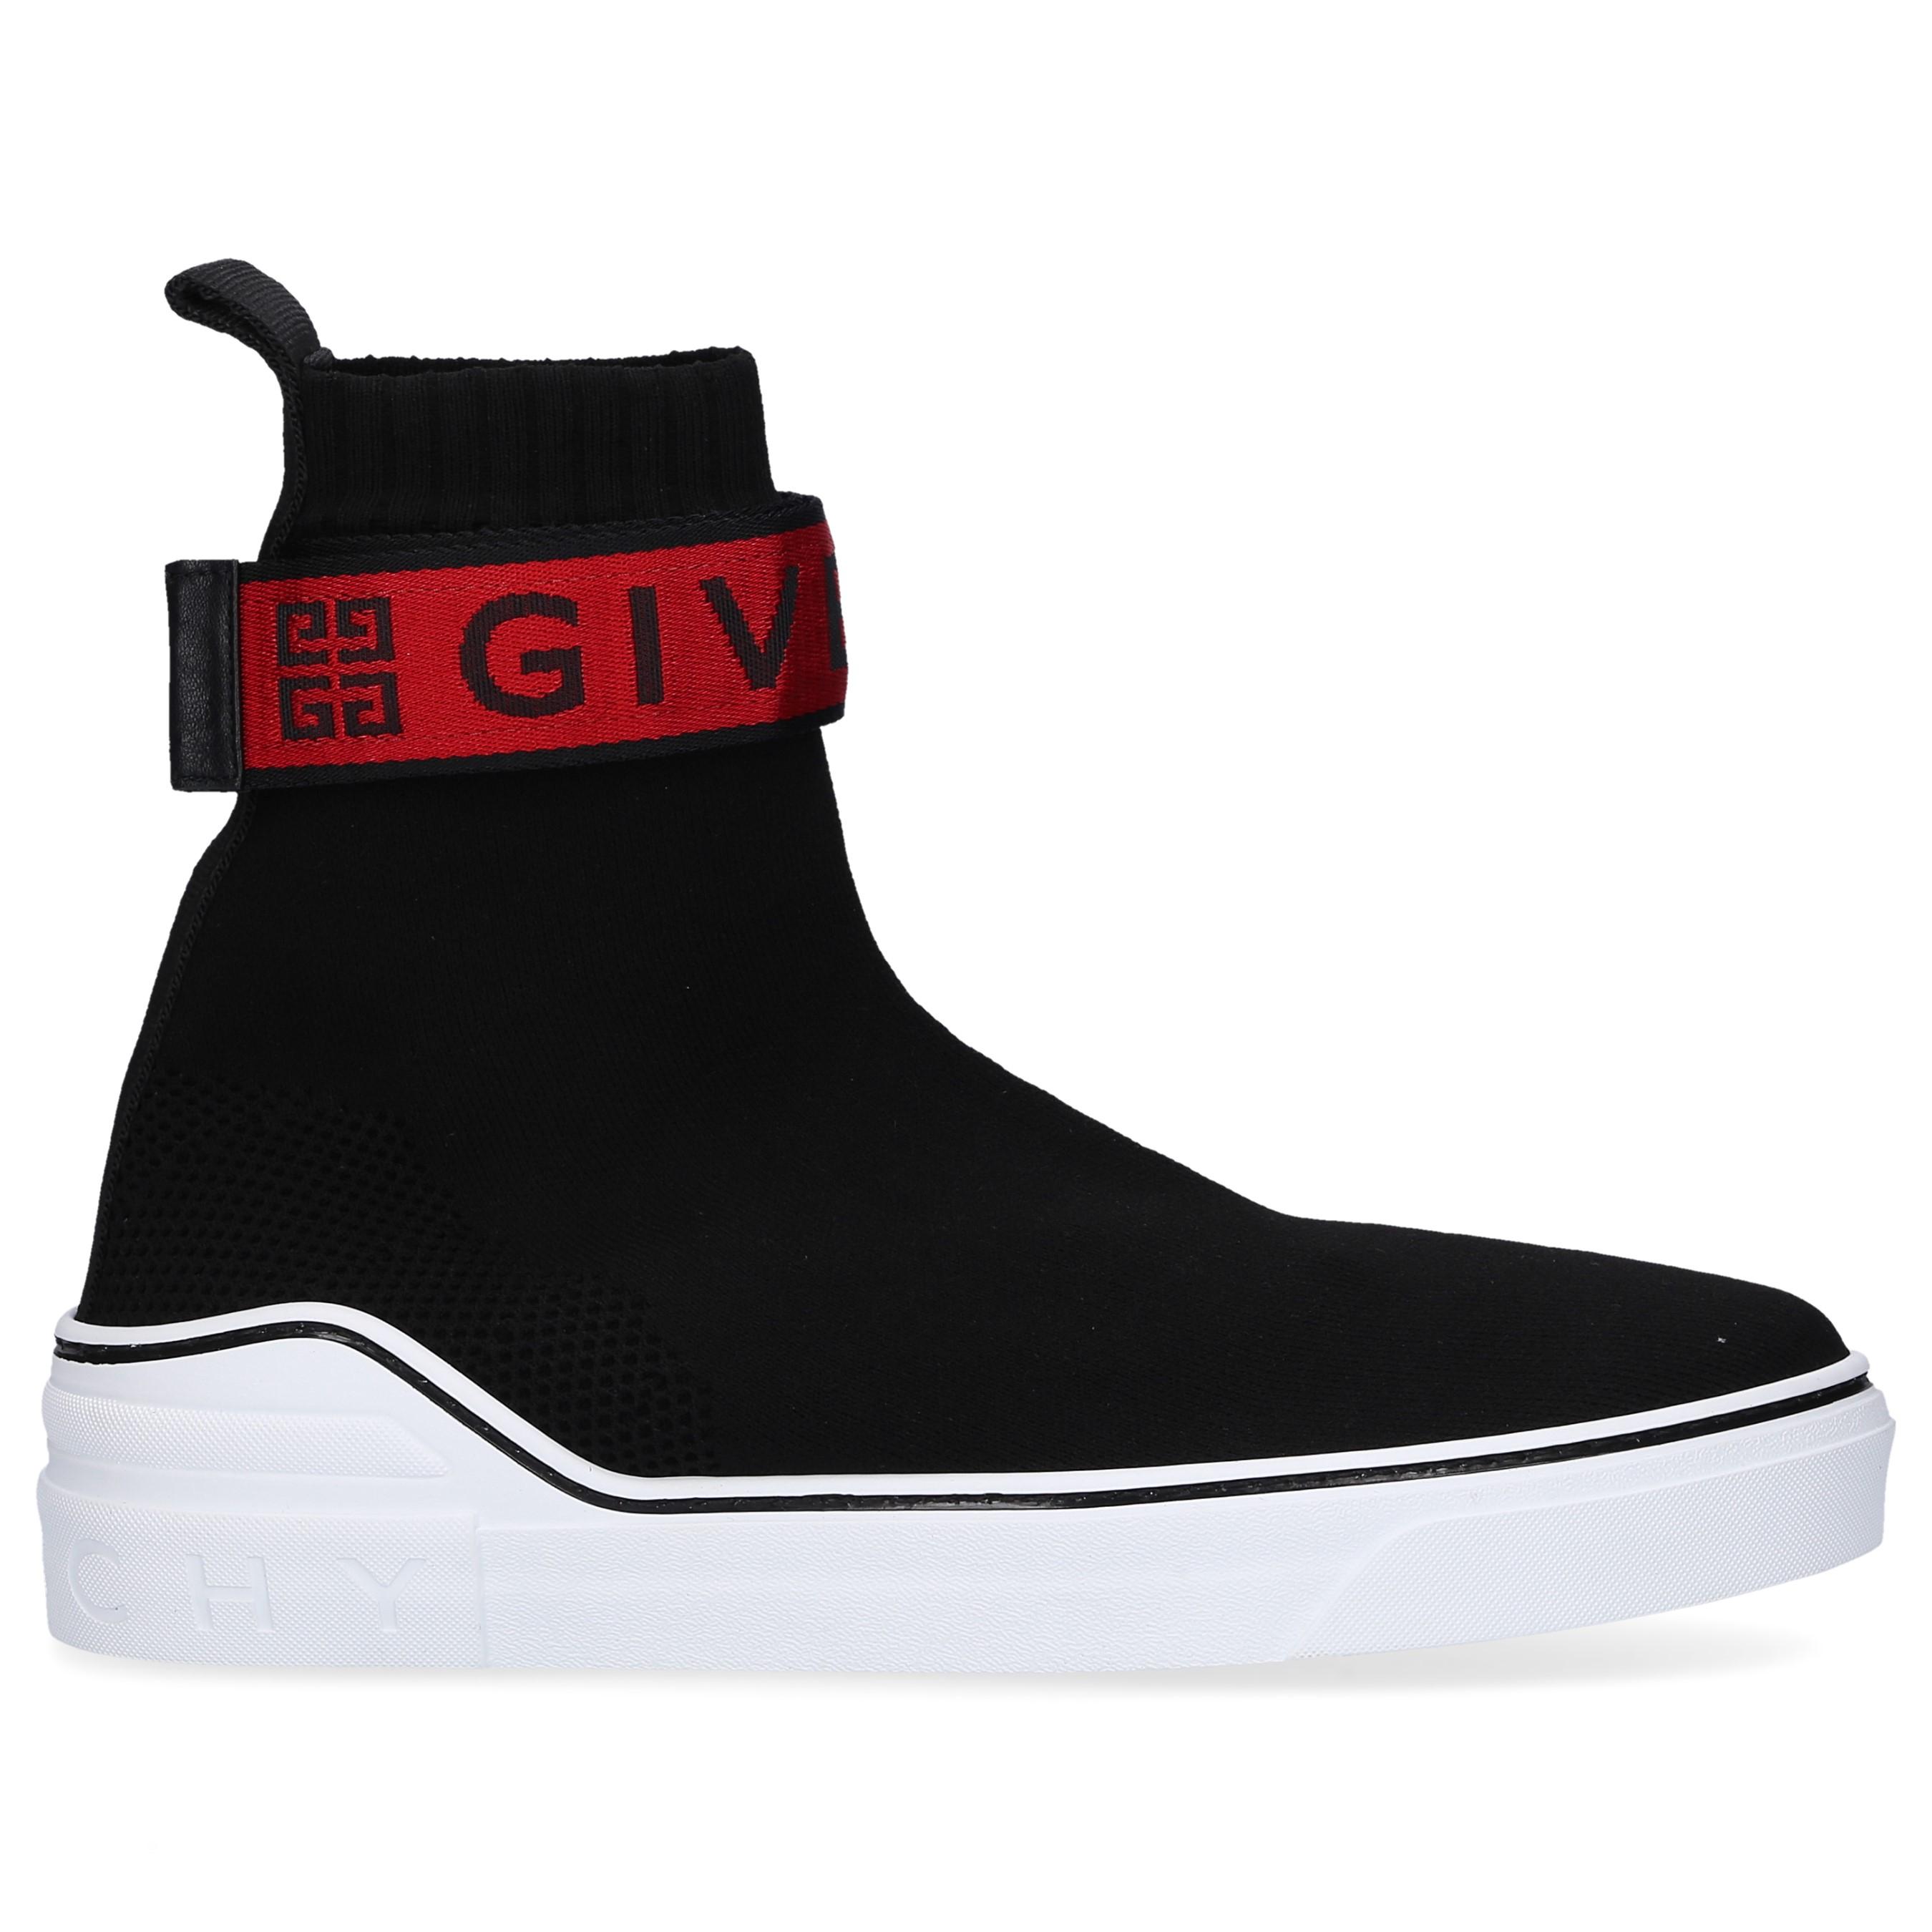 Givenchy Synthetic Sneakers Black George V for Men - Lyst